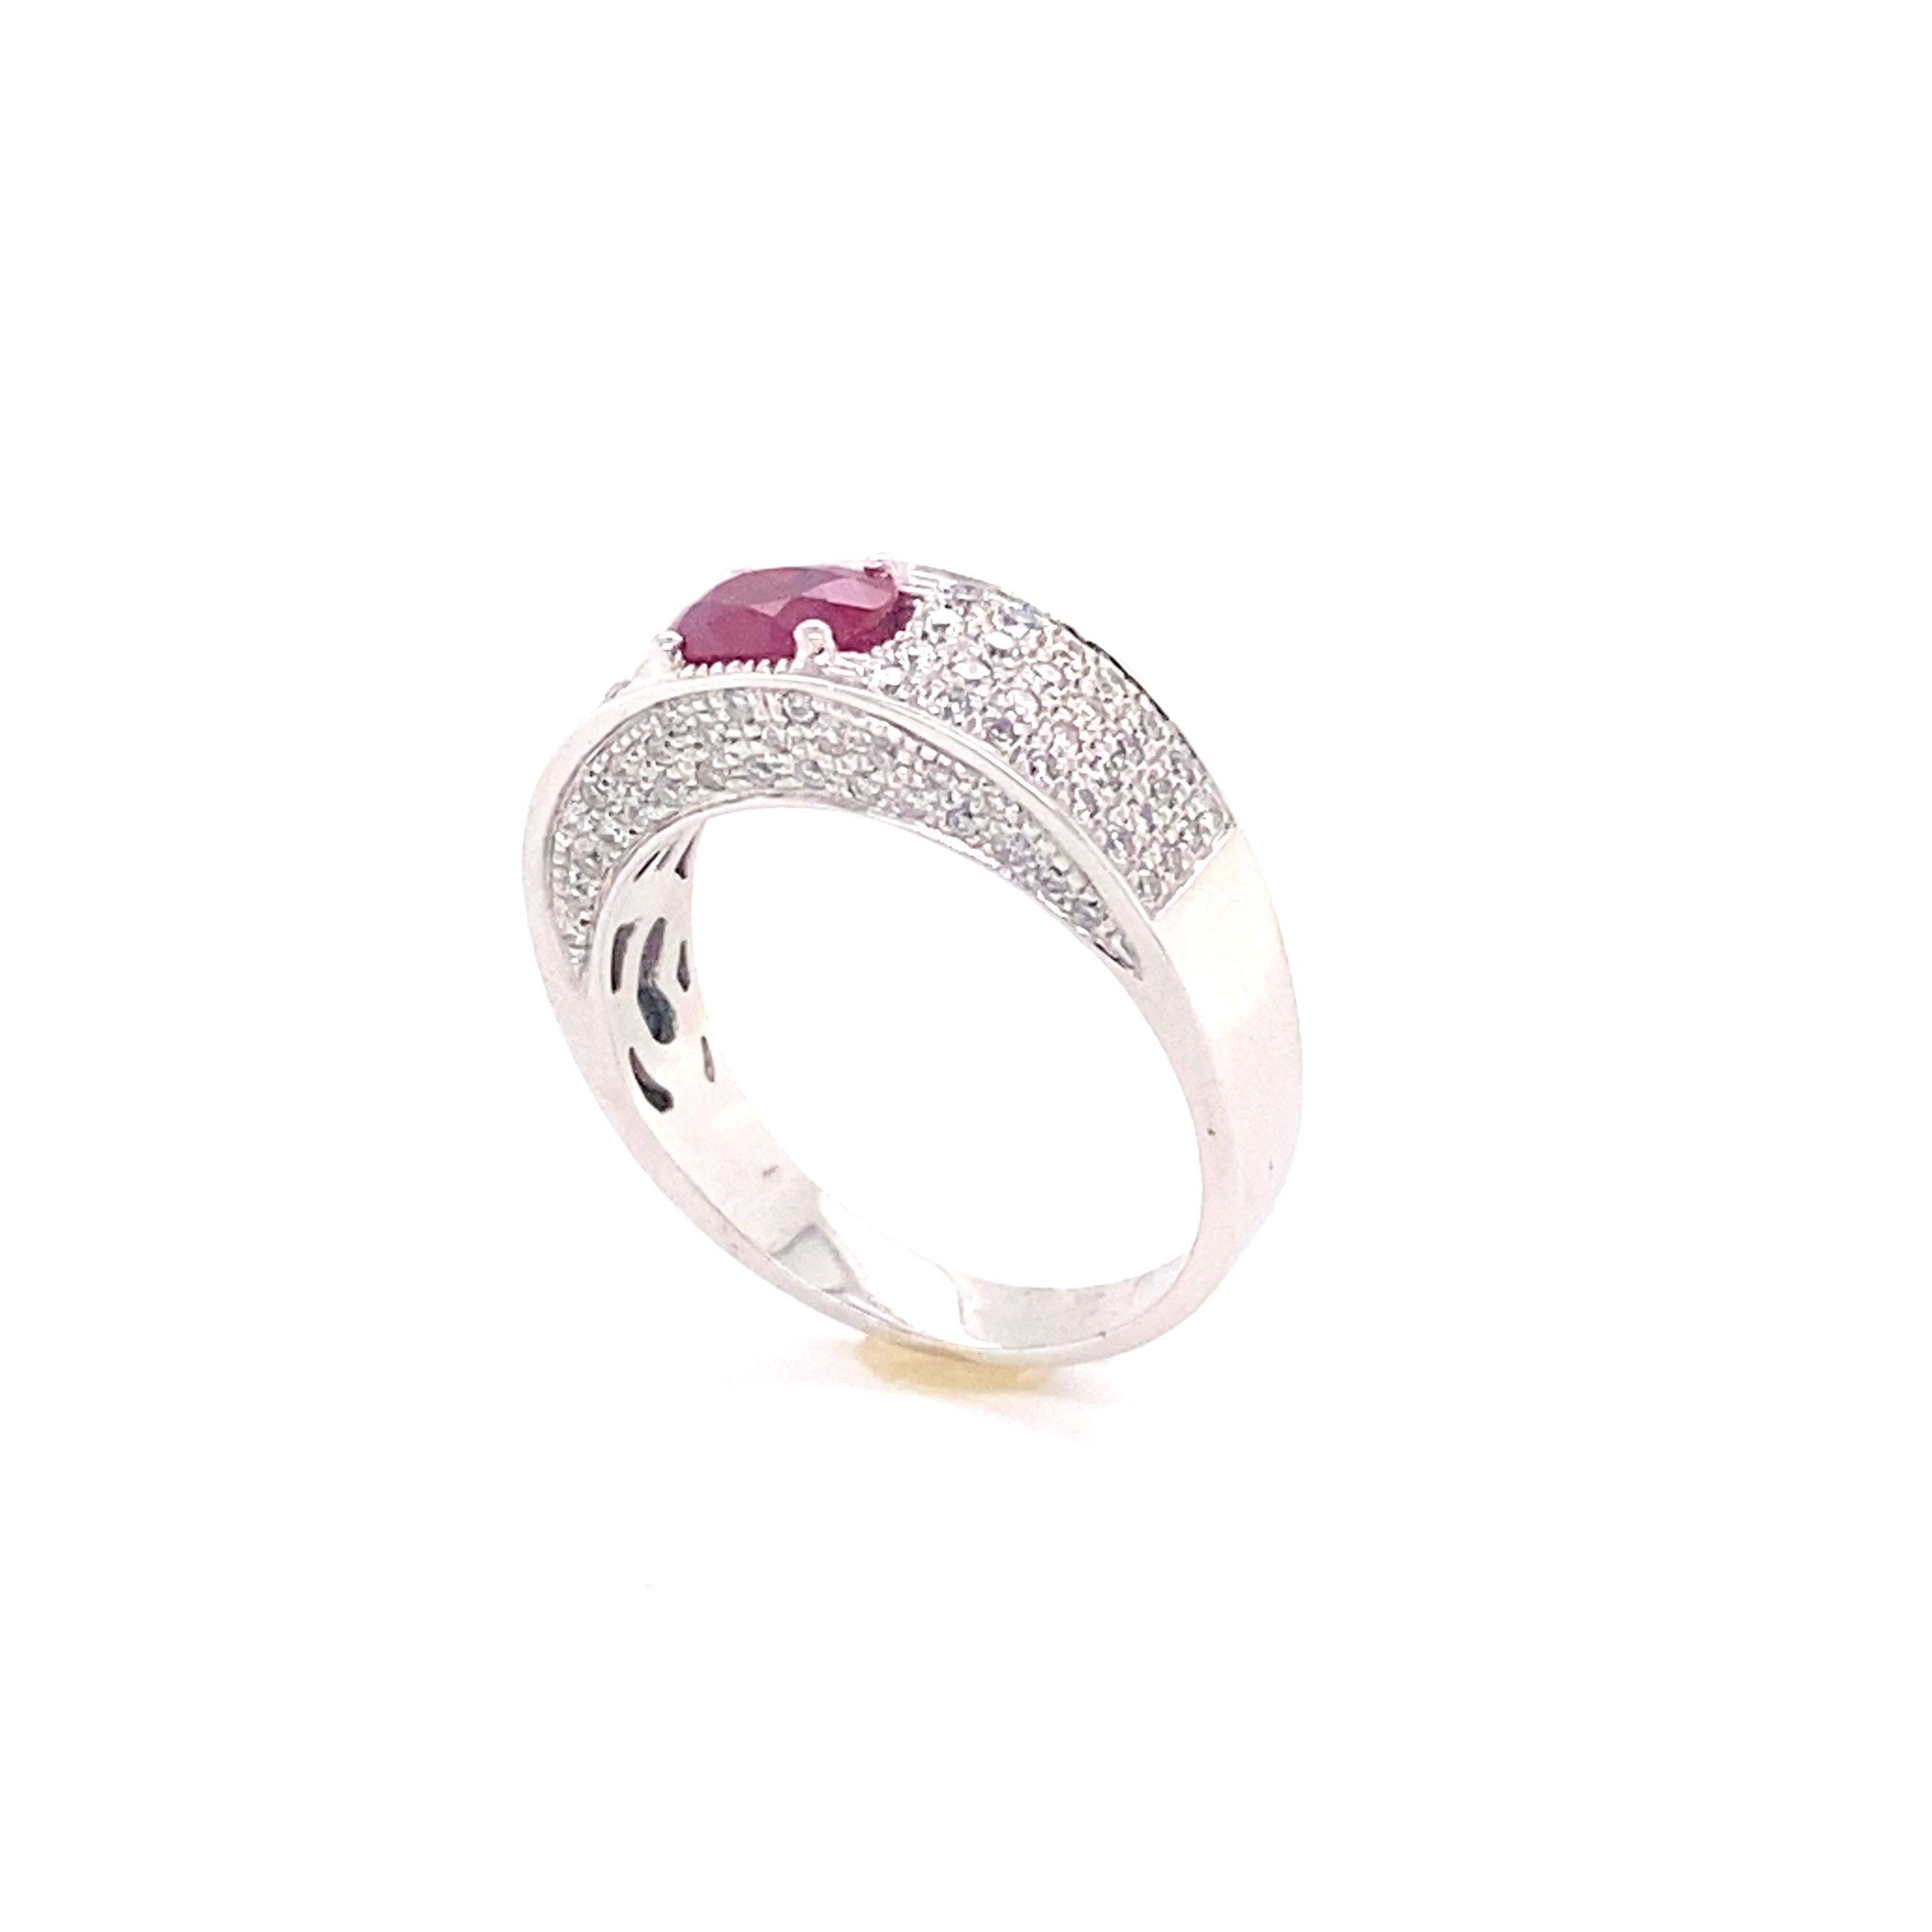 Discover this Ruby and White Diamonds on White Gold Cocktail Ring.
Oval Ruby 1.00 Carat
104 Brilliant White Diamonds Color H Purity SI 0.77 Carat
White Gold 18 Carat
French Size 58 
US Size 8 1/8